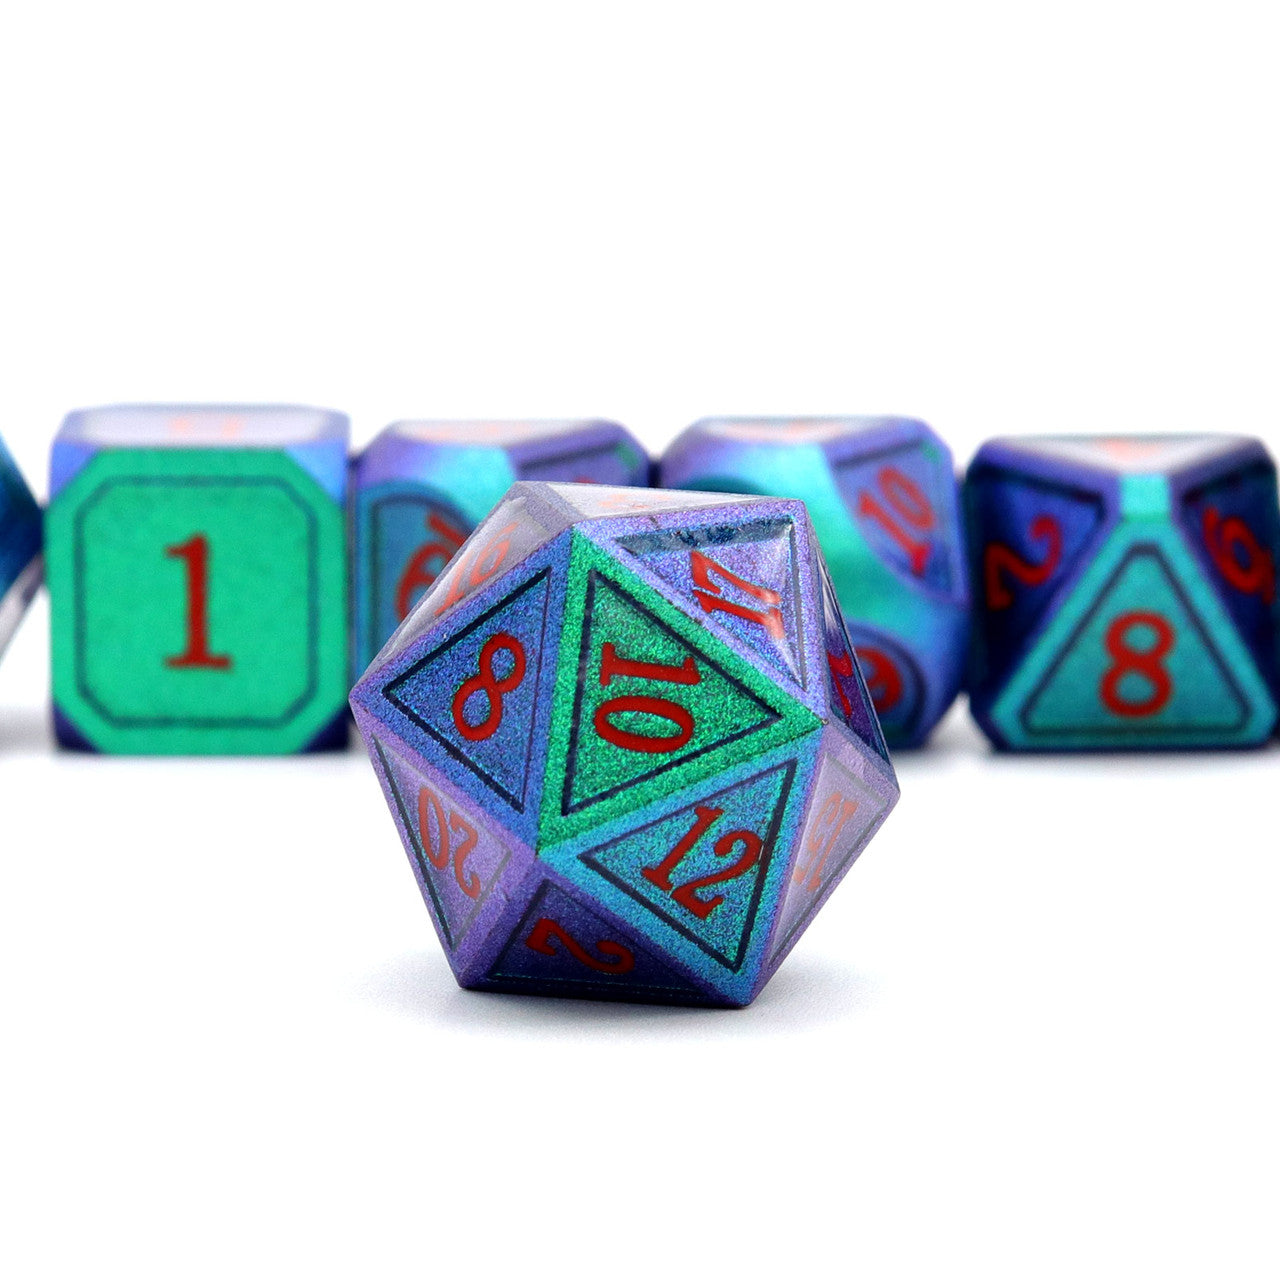 Haxtec Chameleon Metal DND Dice Color Changing Dice-Noble Green Purple Shift Red Numbers